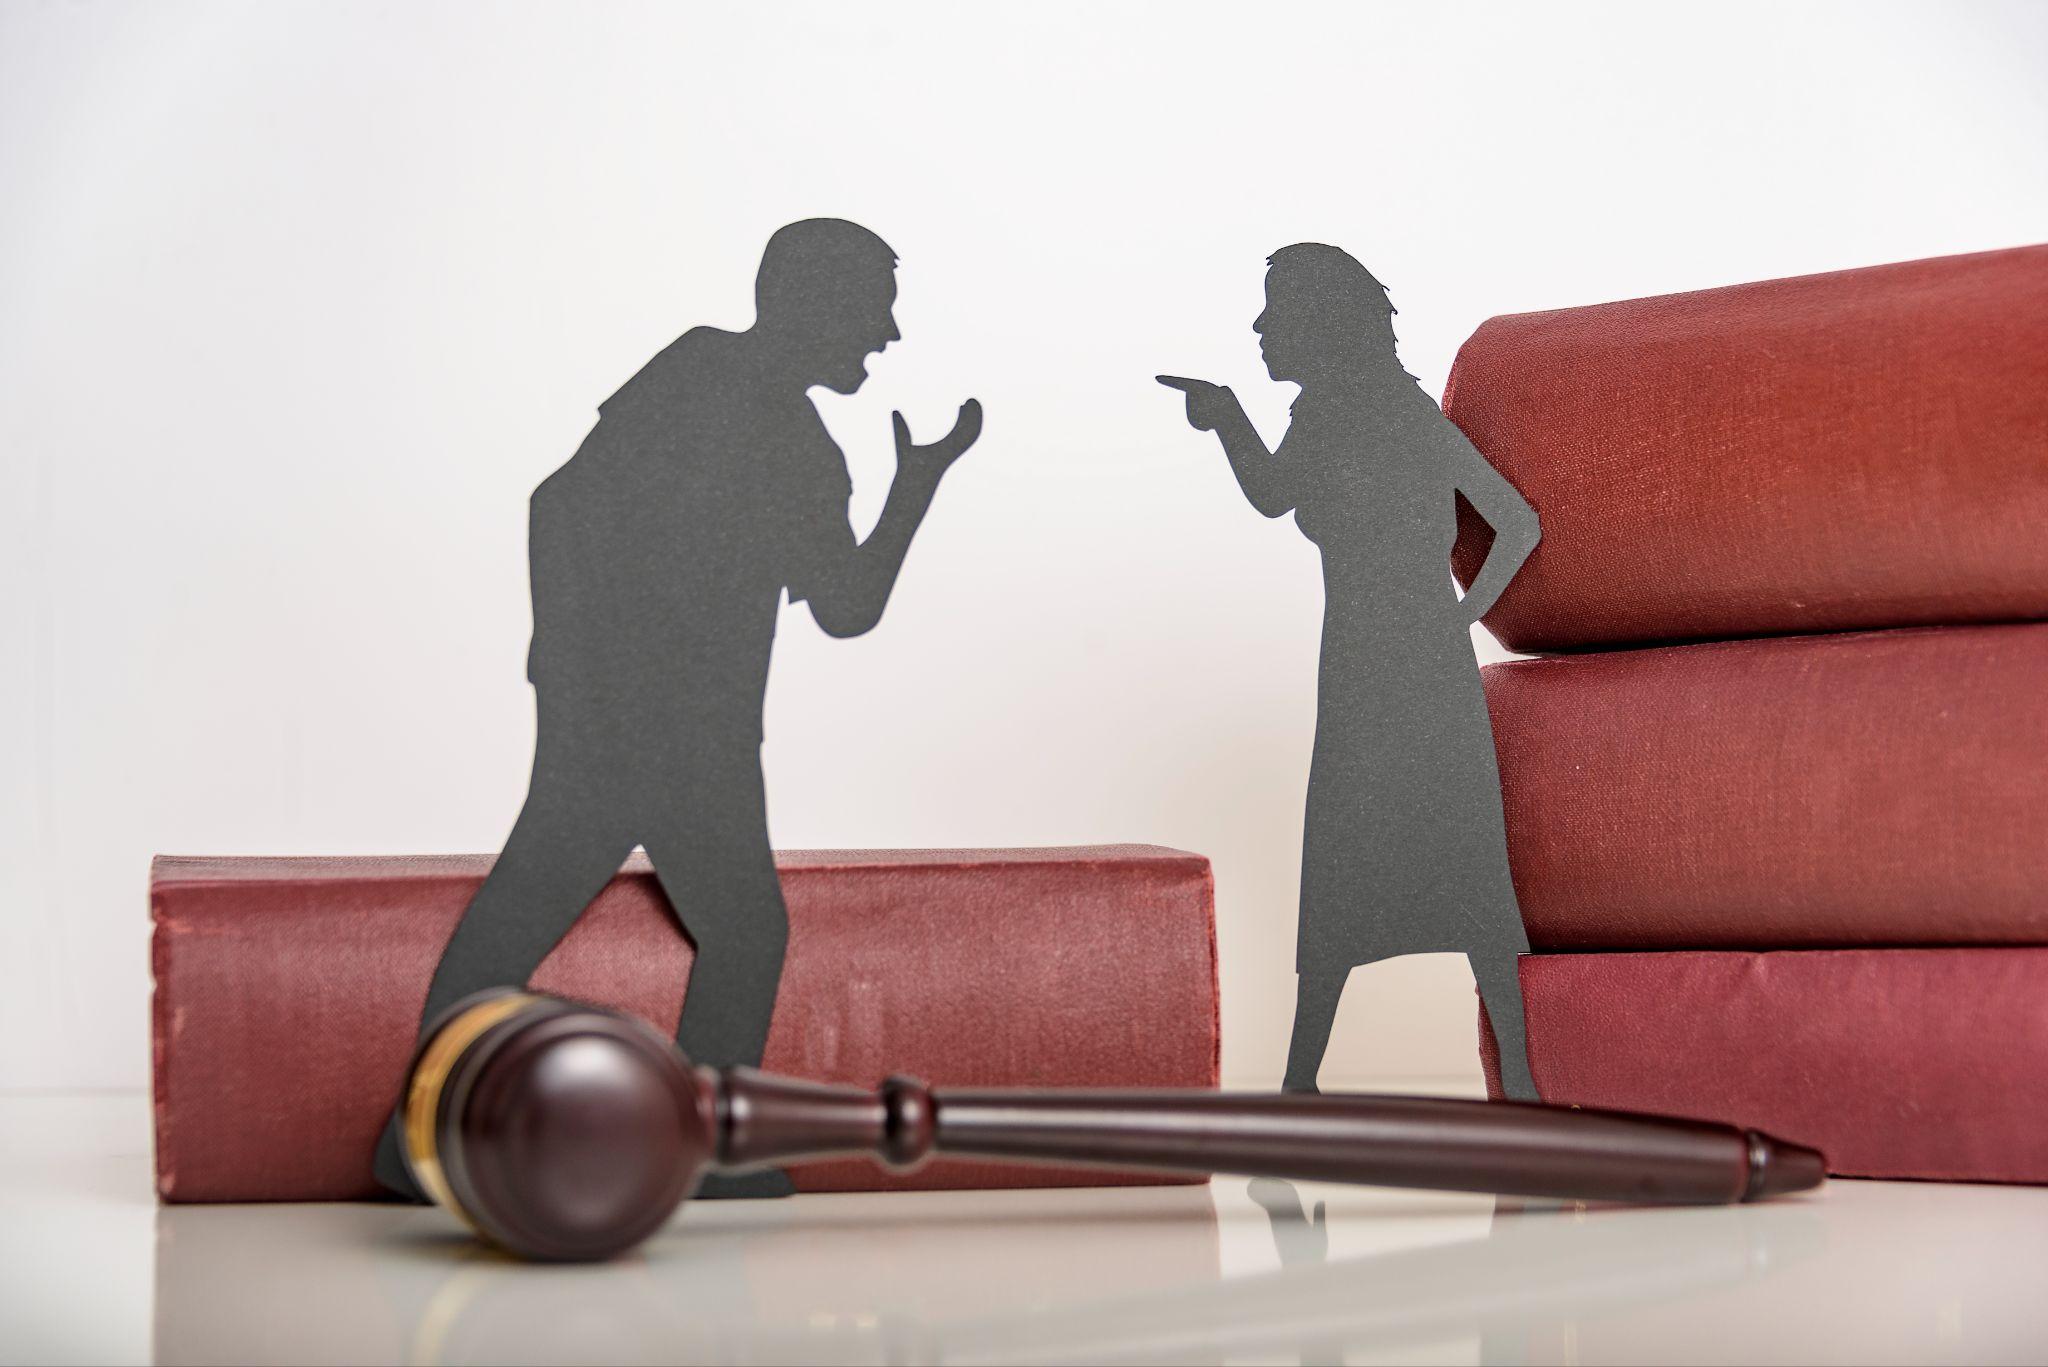 Paper cutouts of a man and a woman arguing next to a stack of red books and a wooden gavel on a white surface.